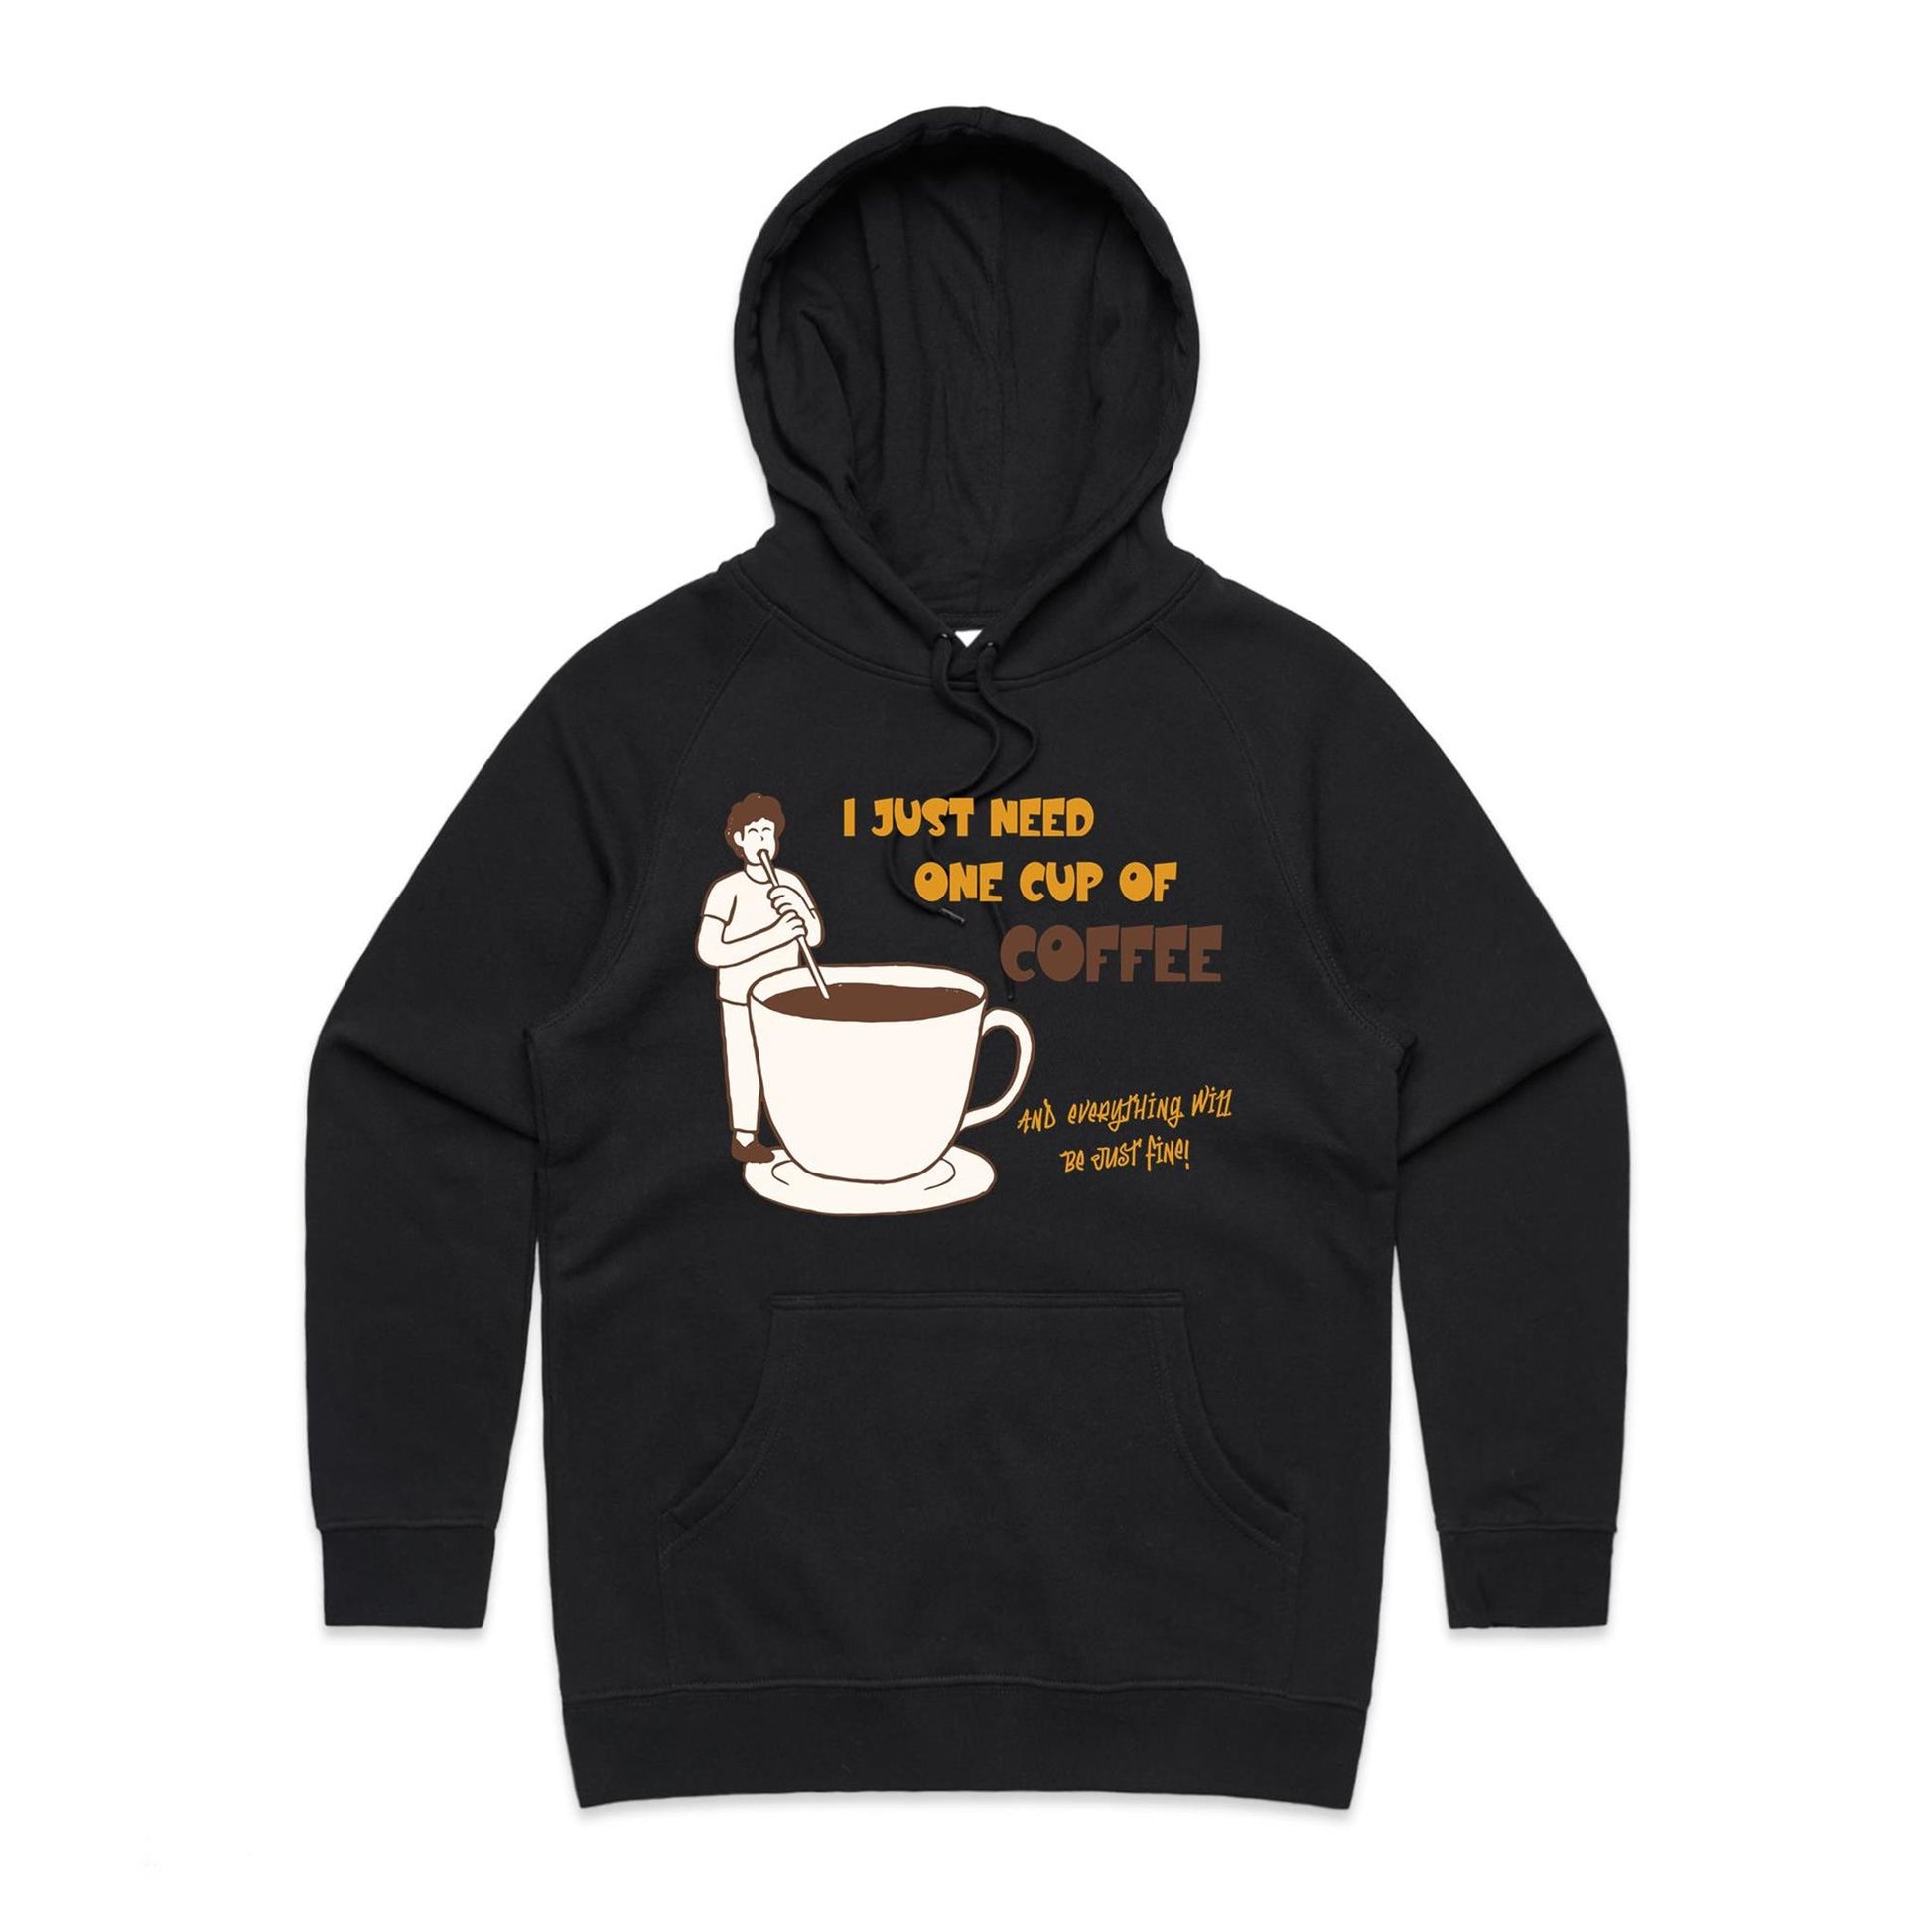 I Just Need One Cup Of Coffee And Everything Will Be Just Fine - Women's Supply Hood Black Womens Supply Hoodie Coffee